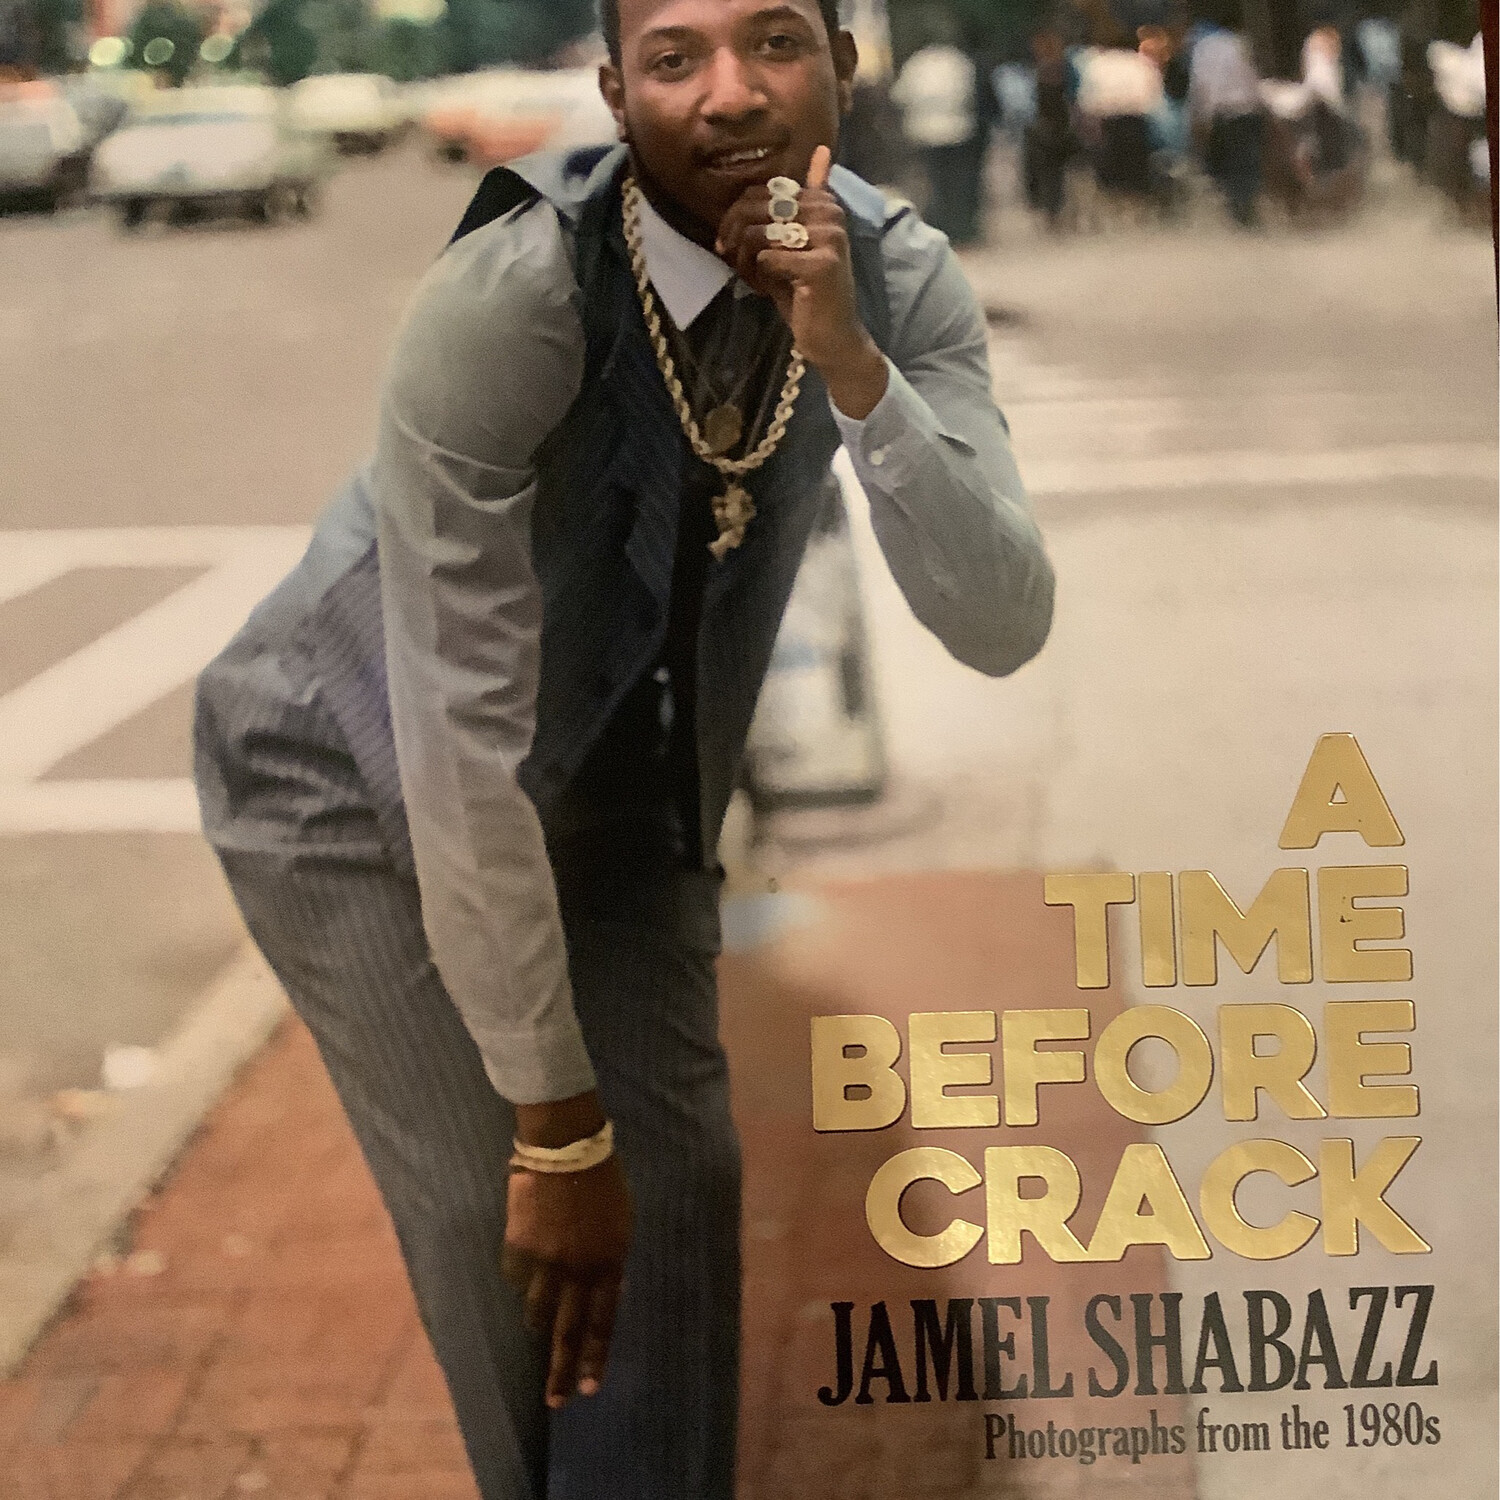 A Time Before Crack By Jamel Shabazz